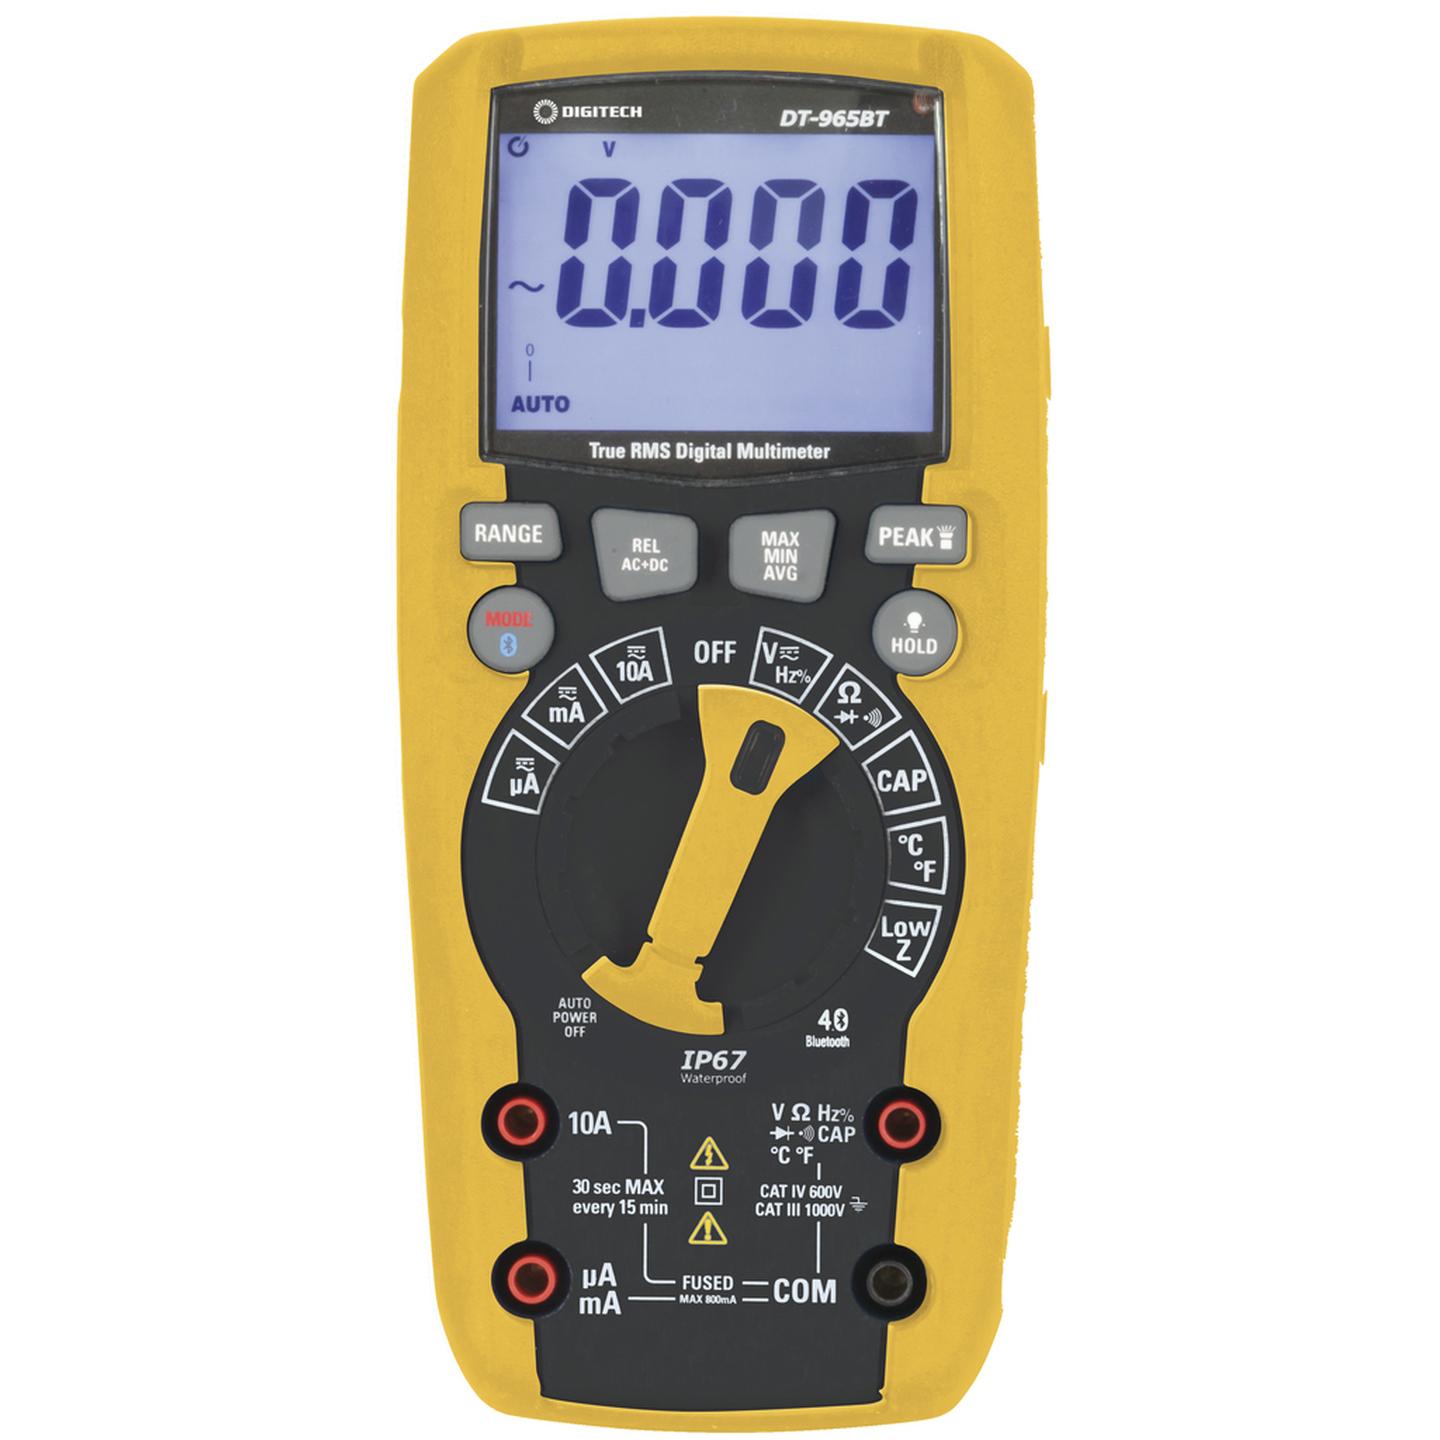 True RMS Digital Multimeter with Bluetooth Connectivity